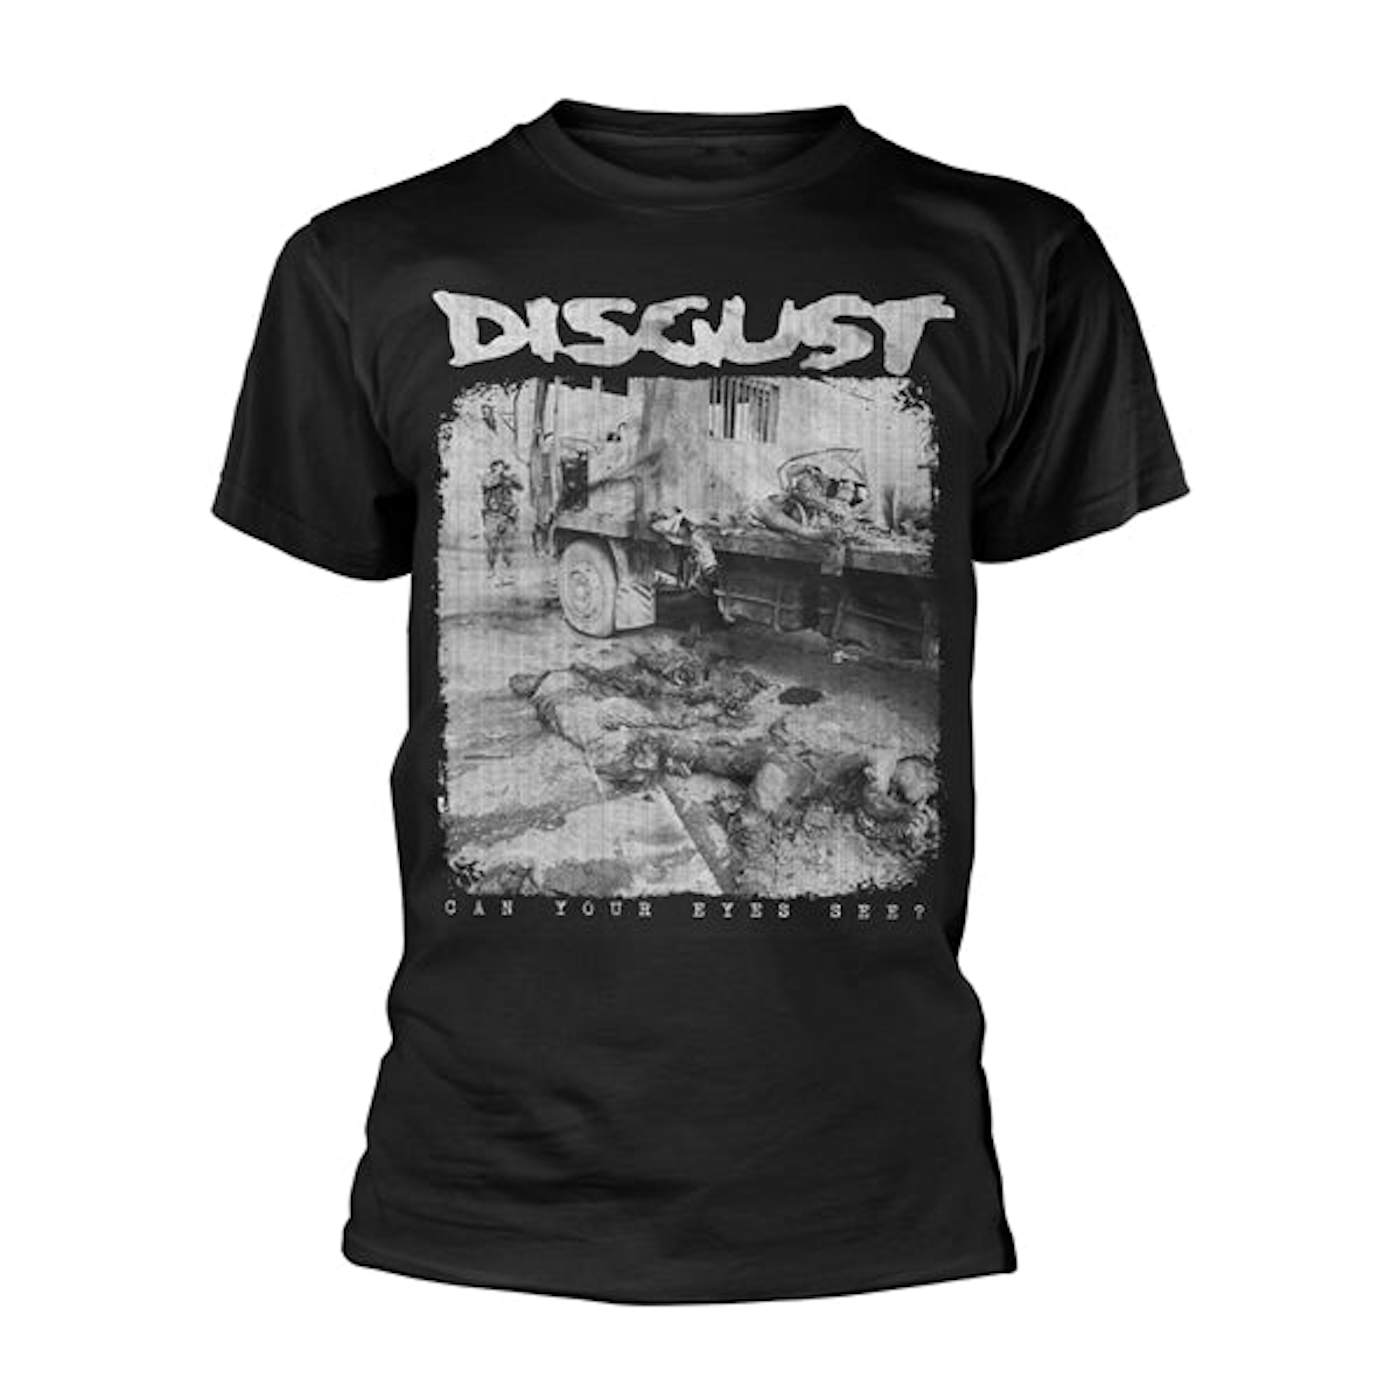 Disgust T-Shirt - Can Your Eyes See?